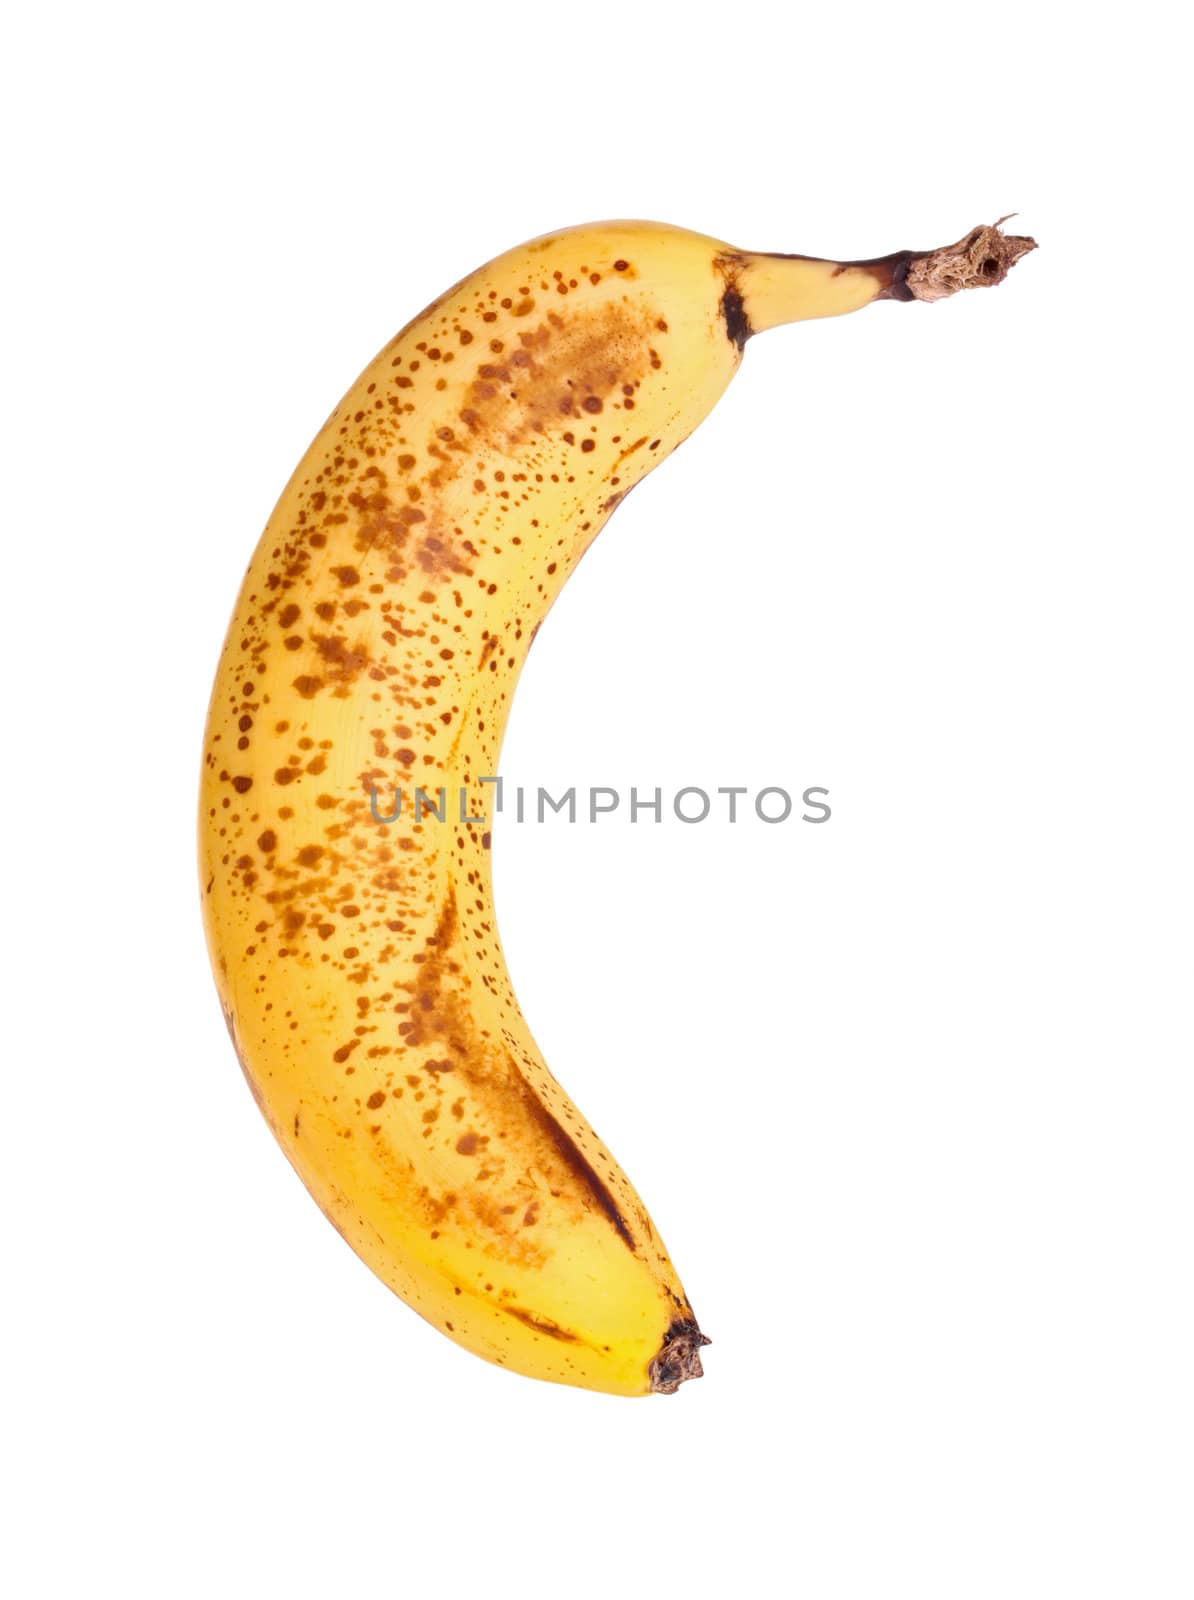 Ripe, spotted banana isolated against a white background by sgoodwin4813